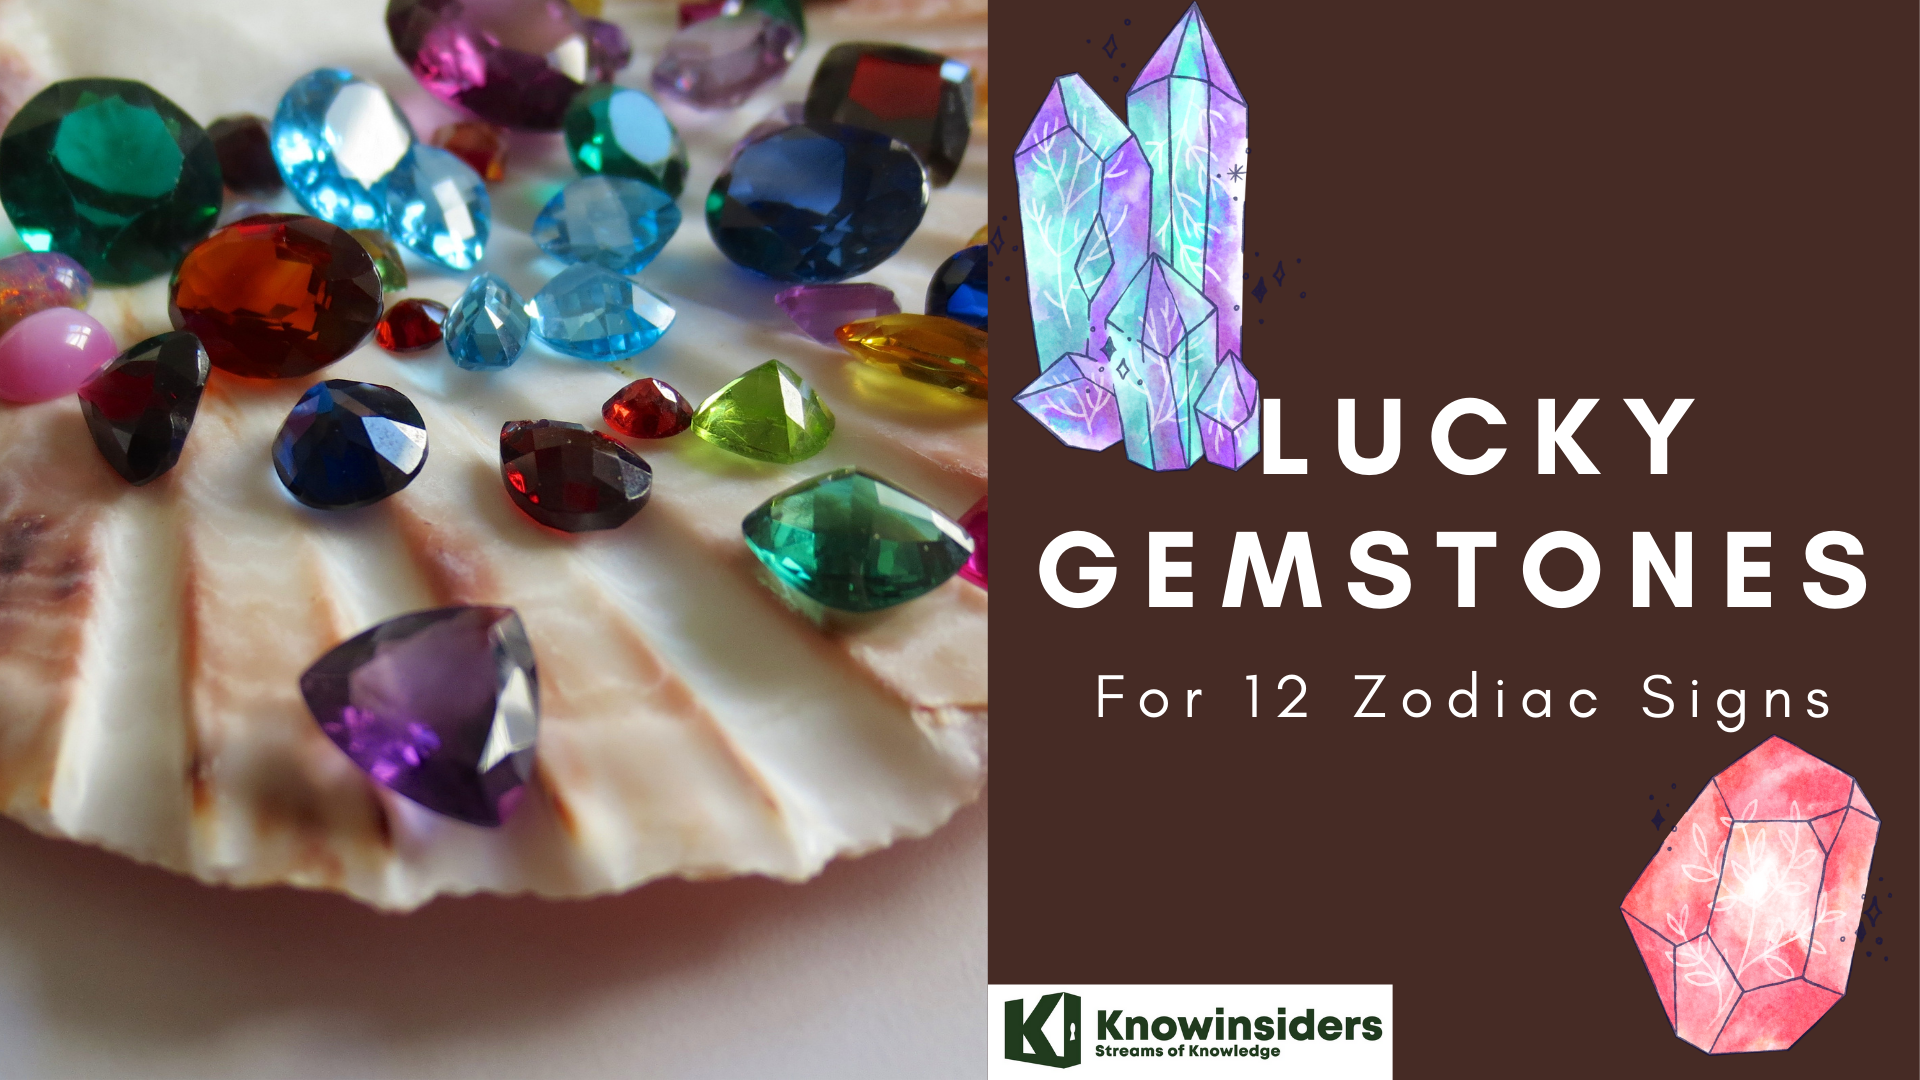 Luckiest Gemstones for Zodiac Signs According to Astrology